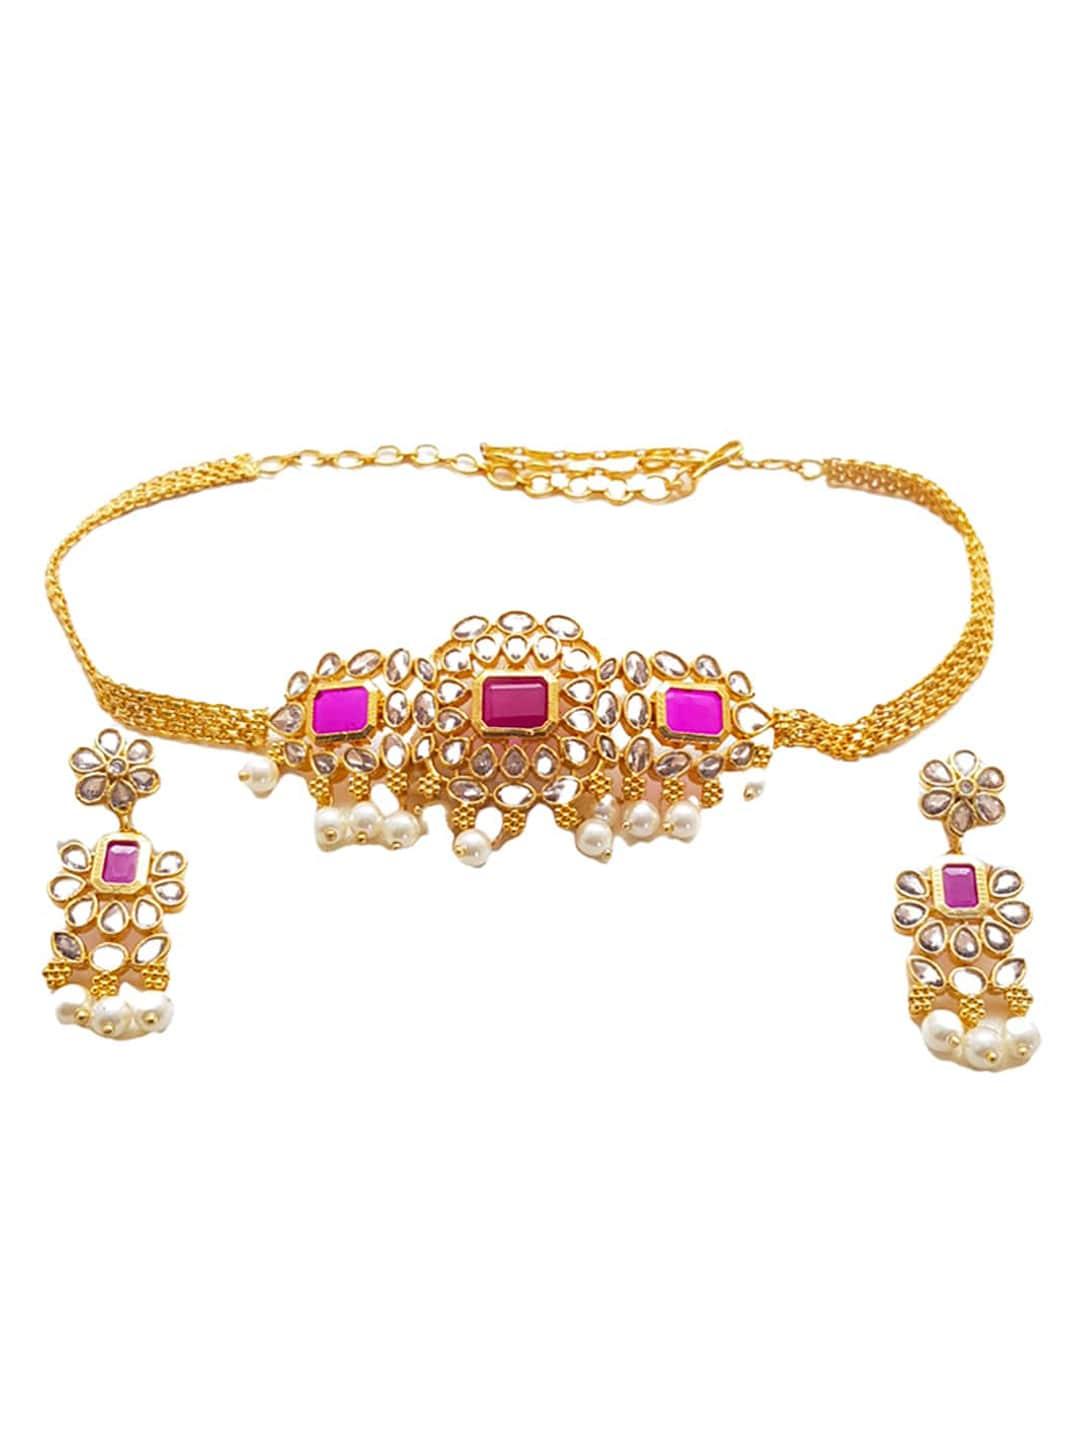 griiham gold-plated white & pink cz-studded & pearl beaded jewellery set